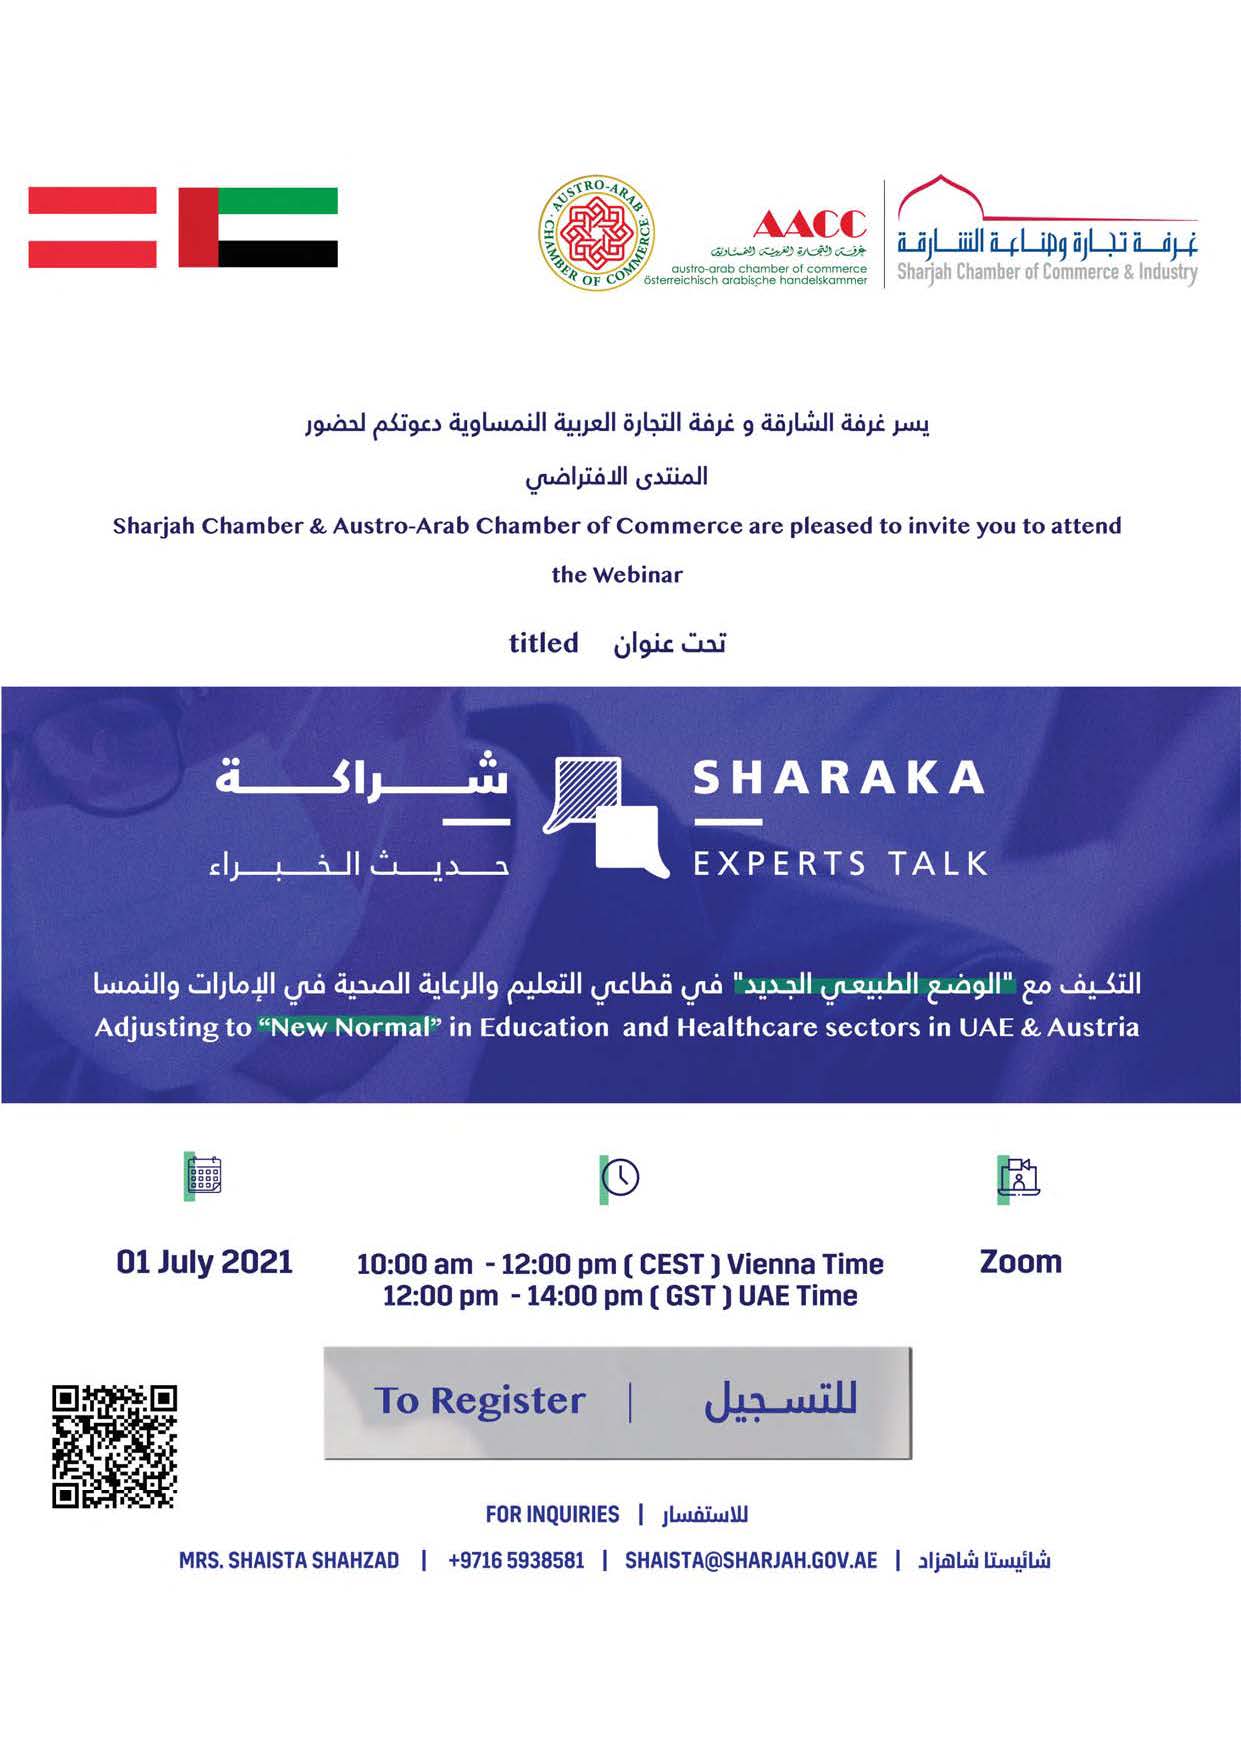 INVITATION &amp; PROGRAM: &quot;Adjusting to &#039;New Normal&#039; in Healthcare and Education &amp; ICT Sectors in Austria &amp; the UAE&quot;